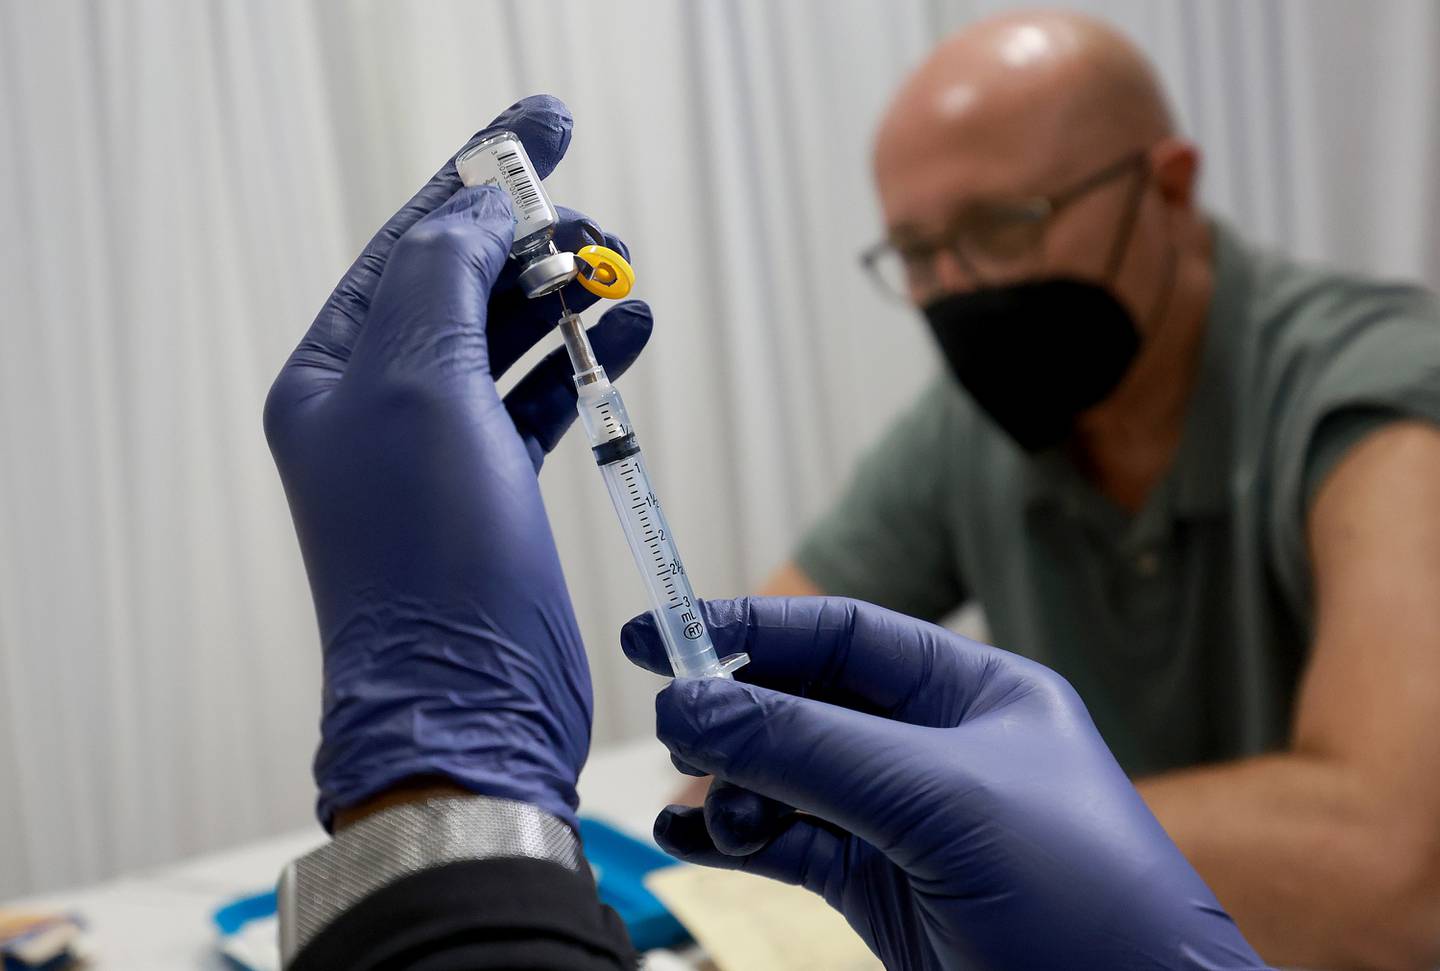 A healthcare worker prepares to administer a vaccine to Michael Nicot for the prevention of monkeypox the Pride Center on July 12, 2022 in Wilton Manors, Florida. The center is offering the free smallpox/monkeypox vaccinations from the Florida Department of Health in Broward County as South Florida leads the state in the number of people infected.